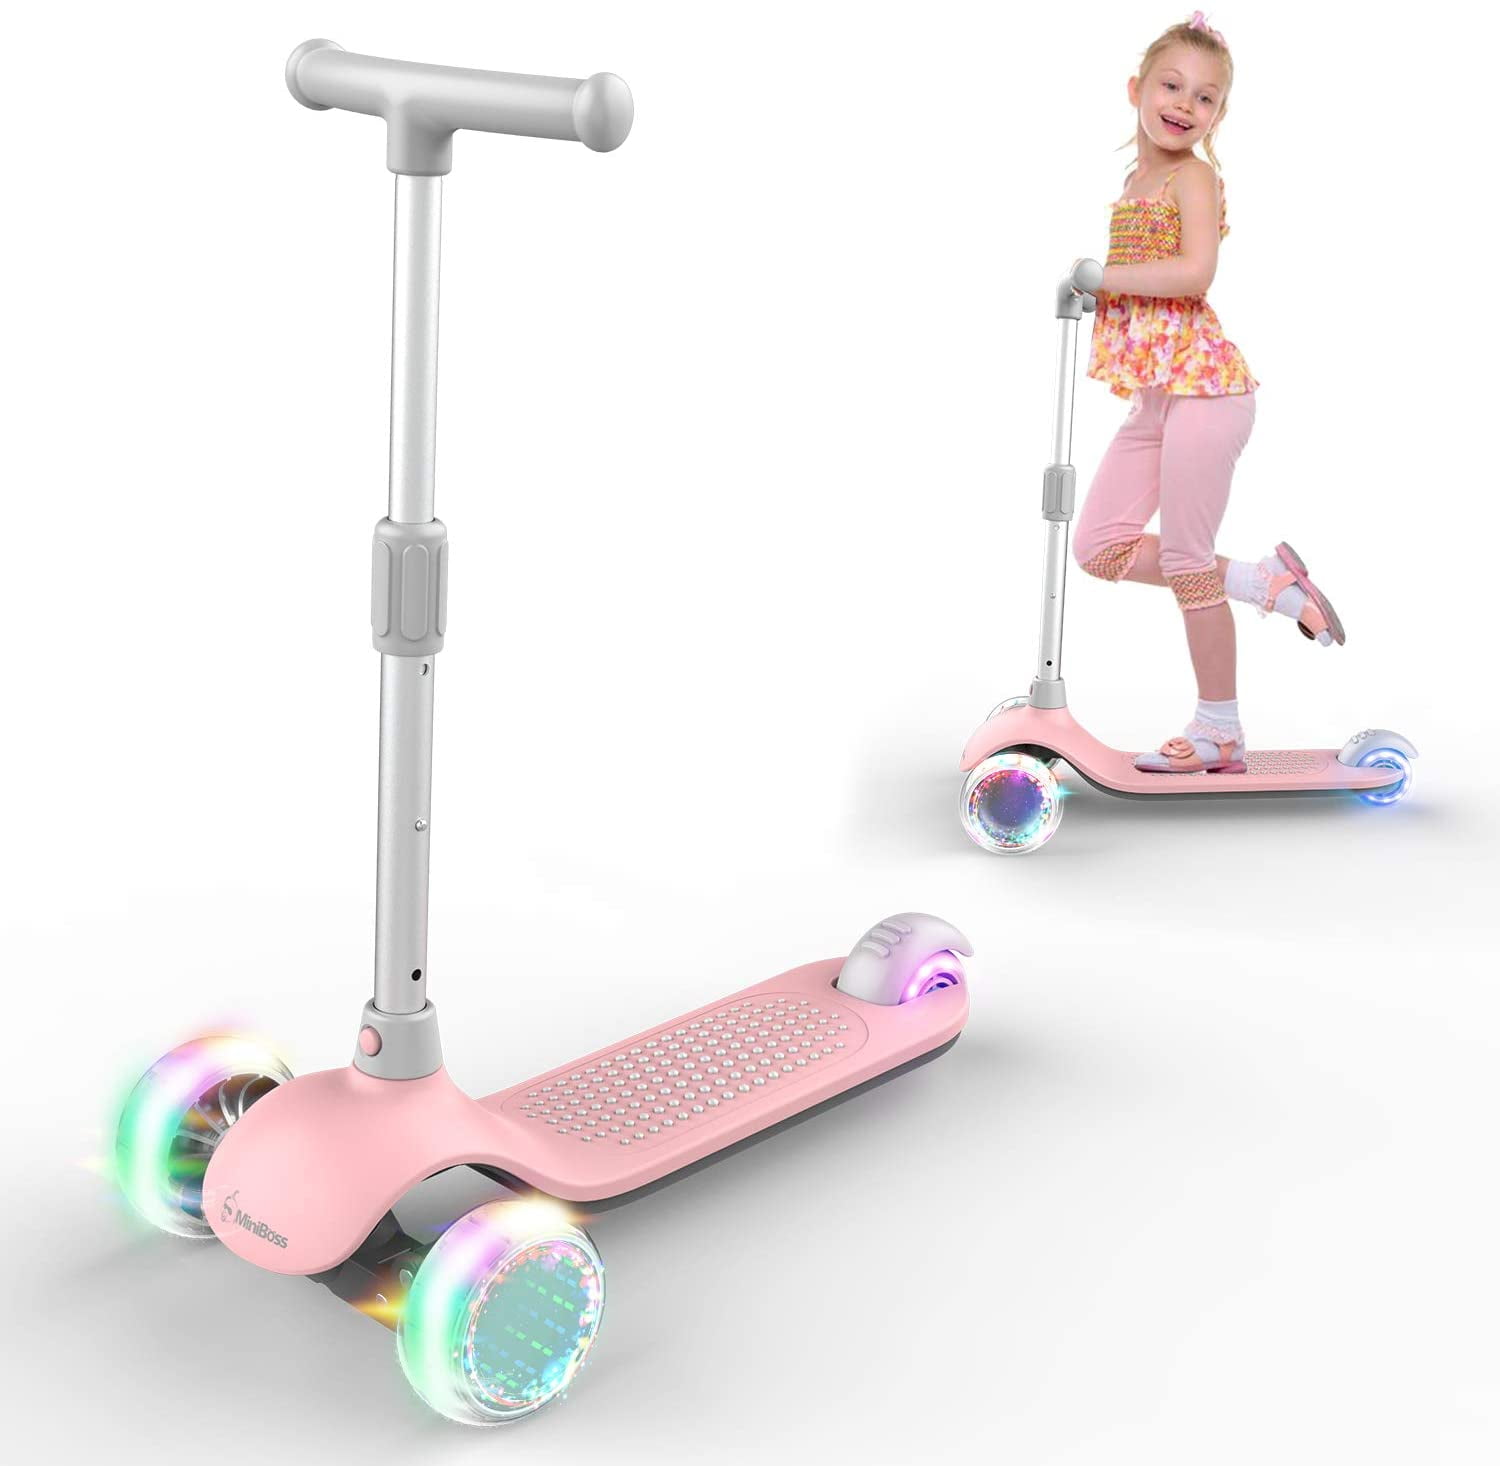 MiniBoss Kick Scooter for Kids, 3 Wheels Kids Scooter with Fashional Lights, Folding Kids Scooter, Flexible Scooter for Kids with Wide Deck & Adjustable Ergonomic Hand Bar, for 2 to 12 Years Kids-Pink